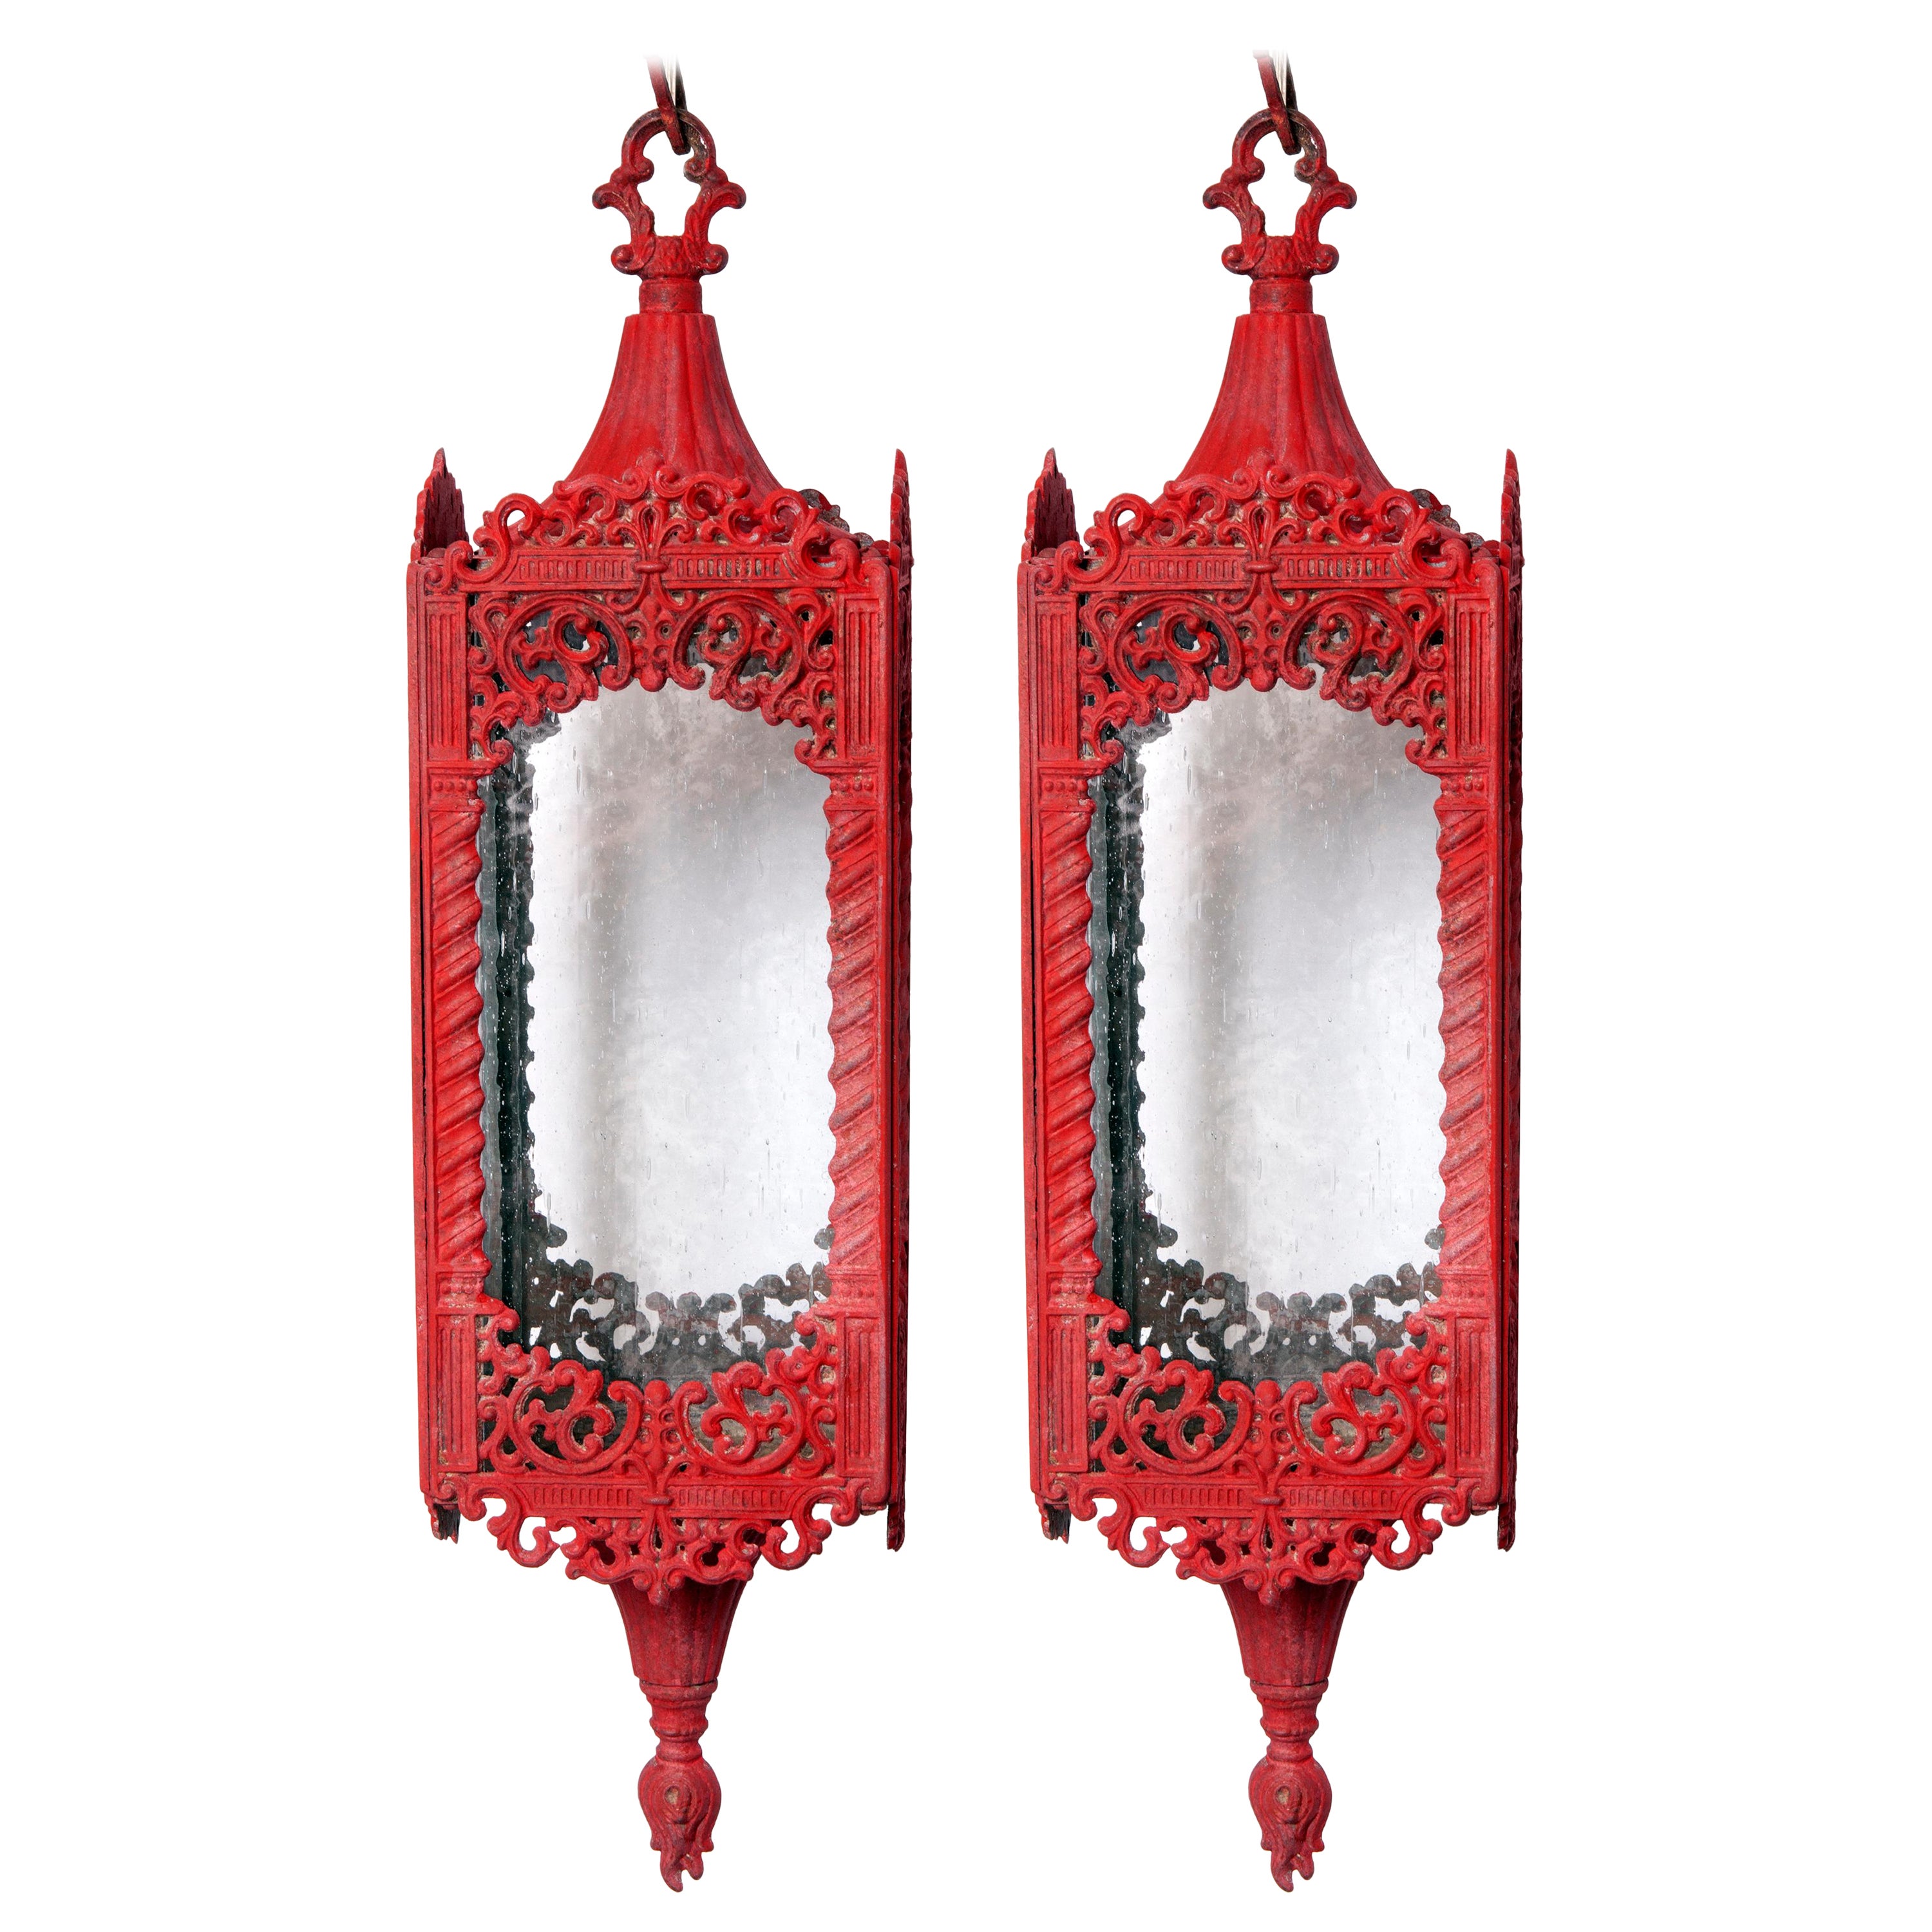 Moroccan Red Lanterns with Seeded Glass Panels